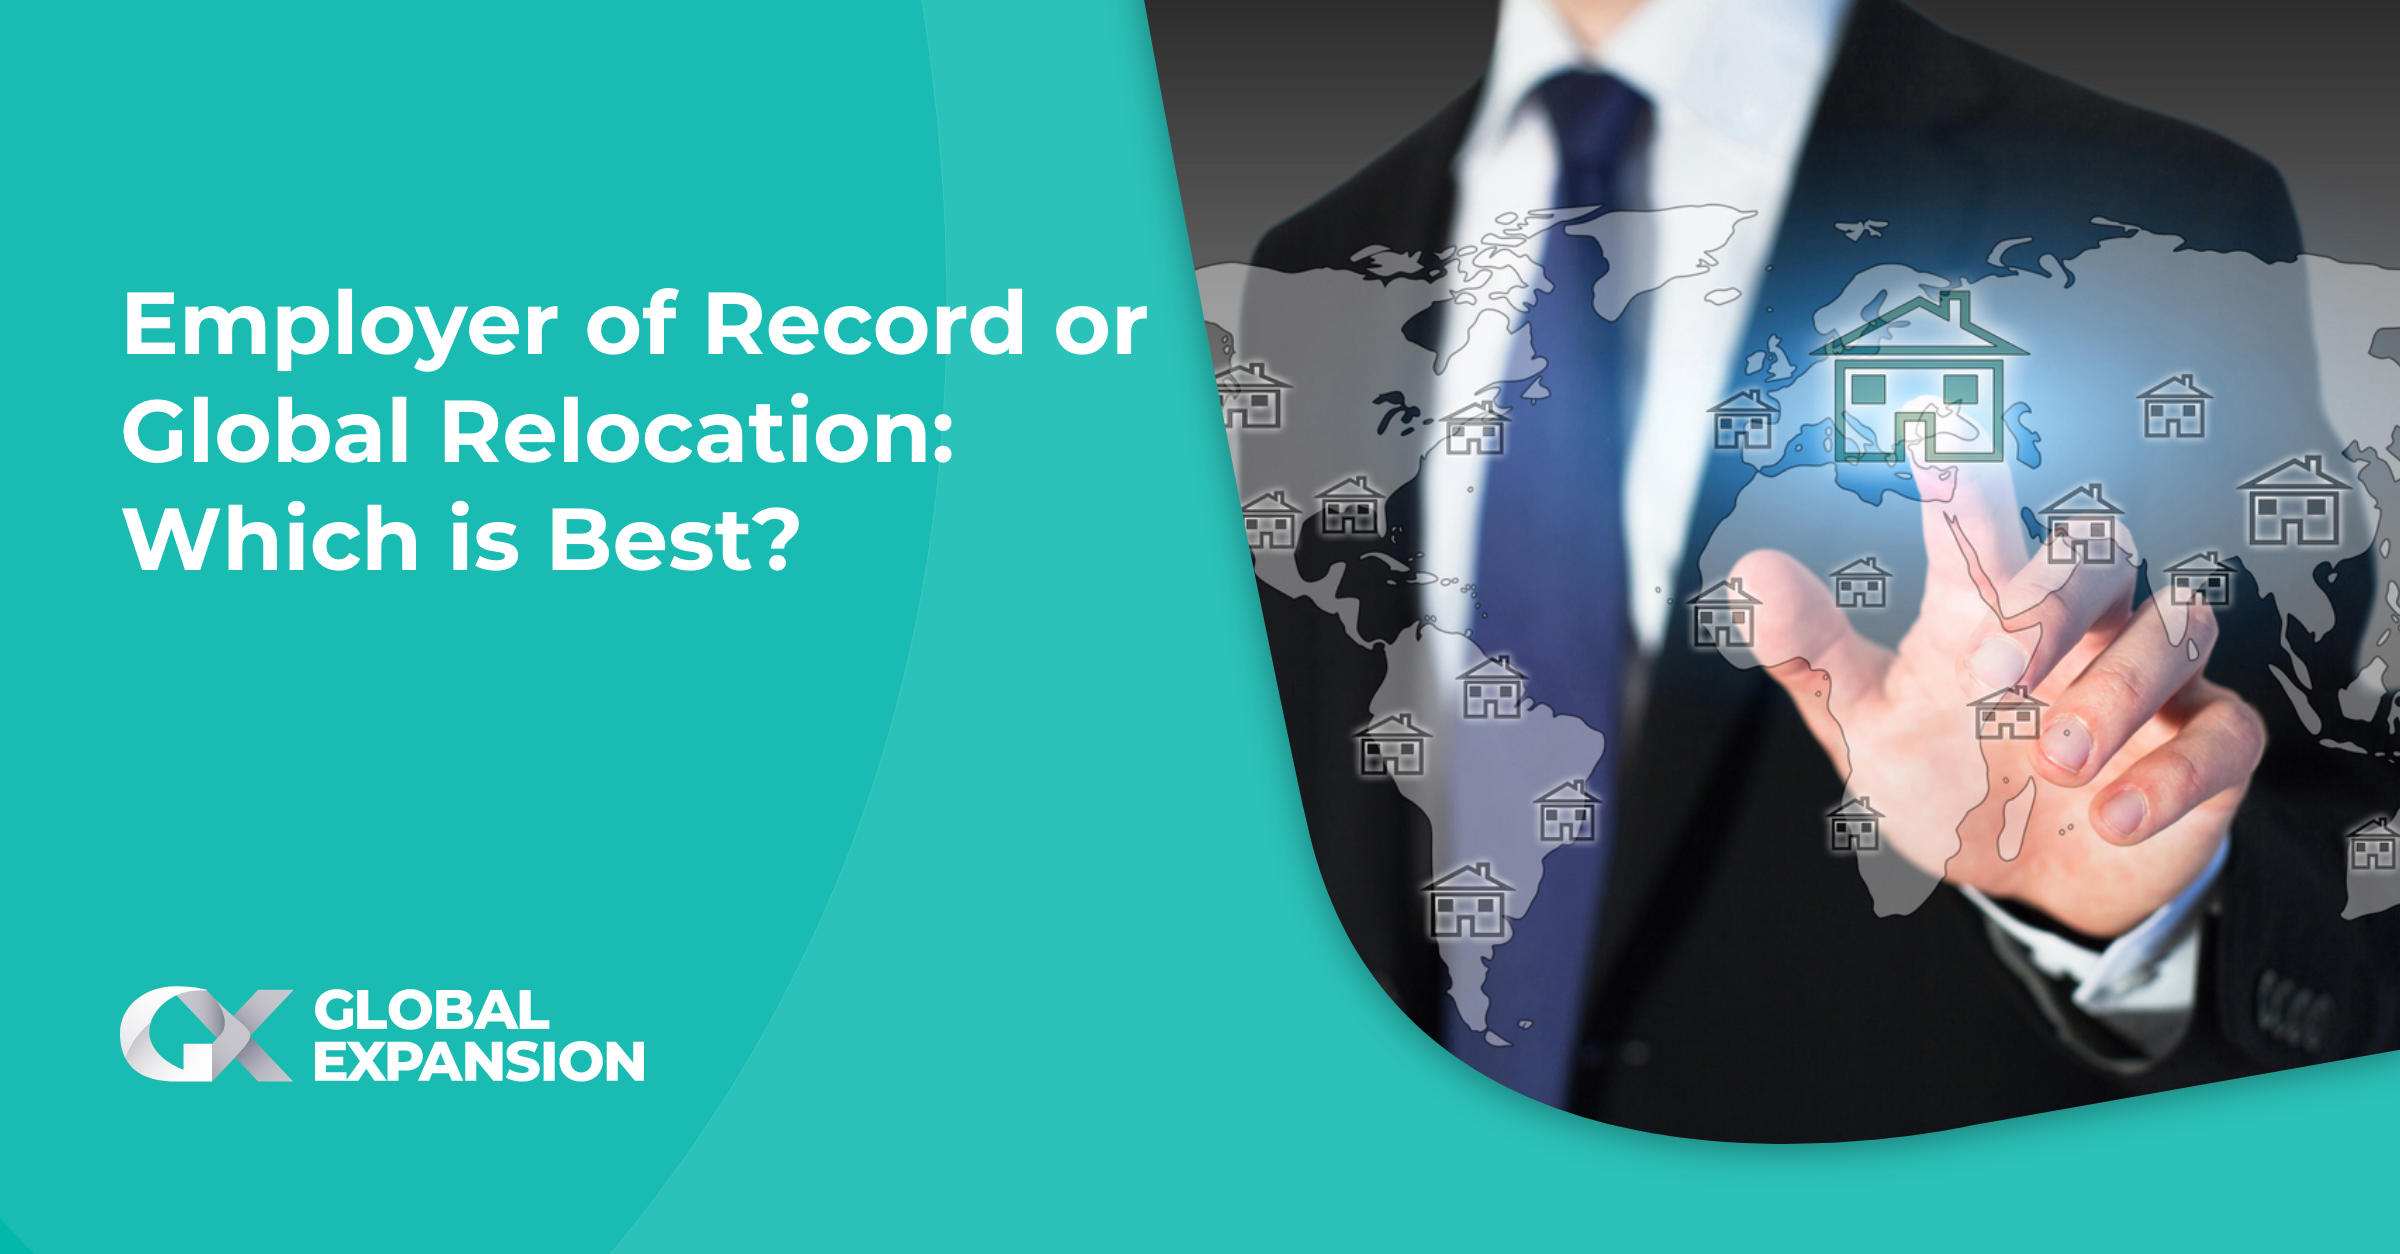 Employer of Record or Global Relocation: Which is Best?